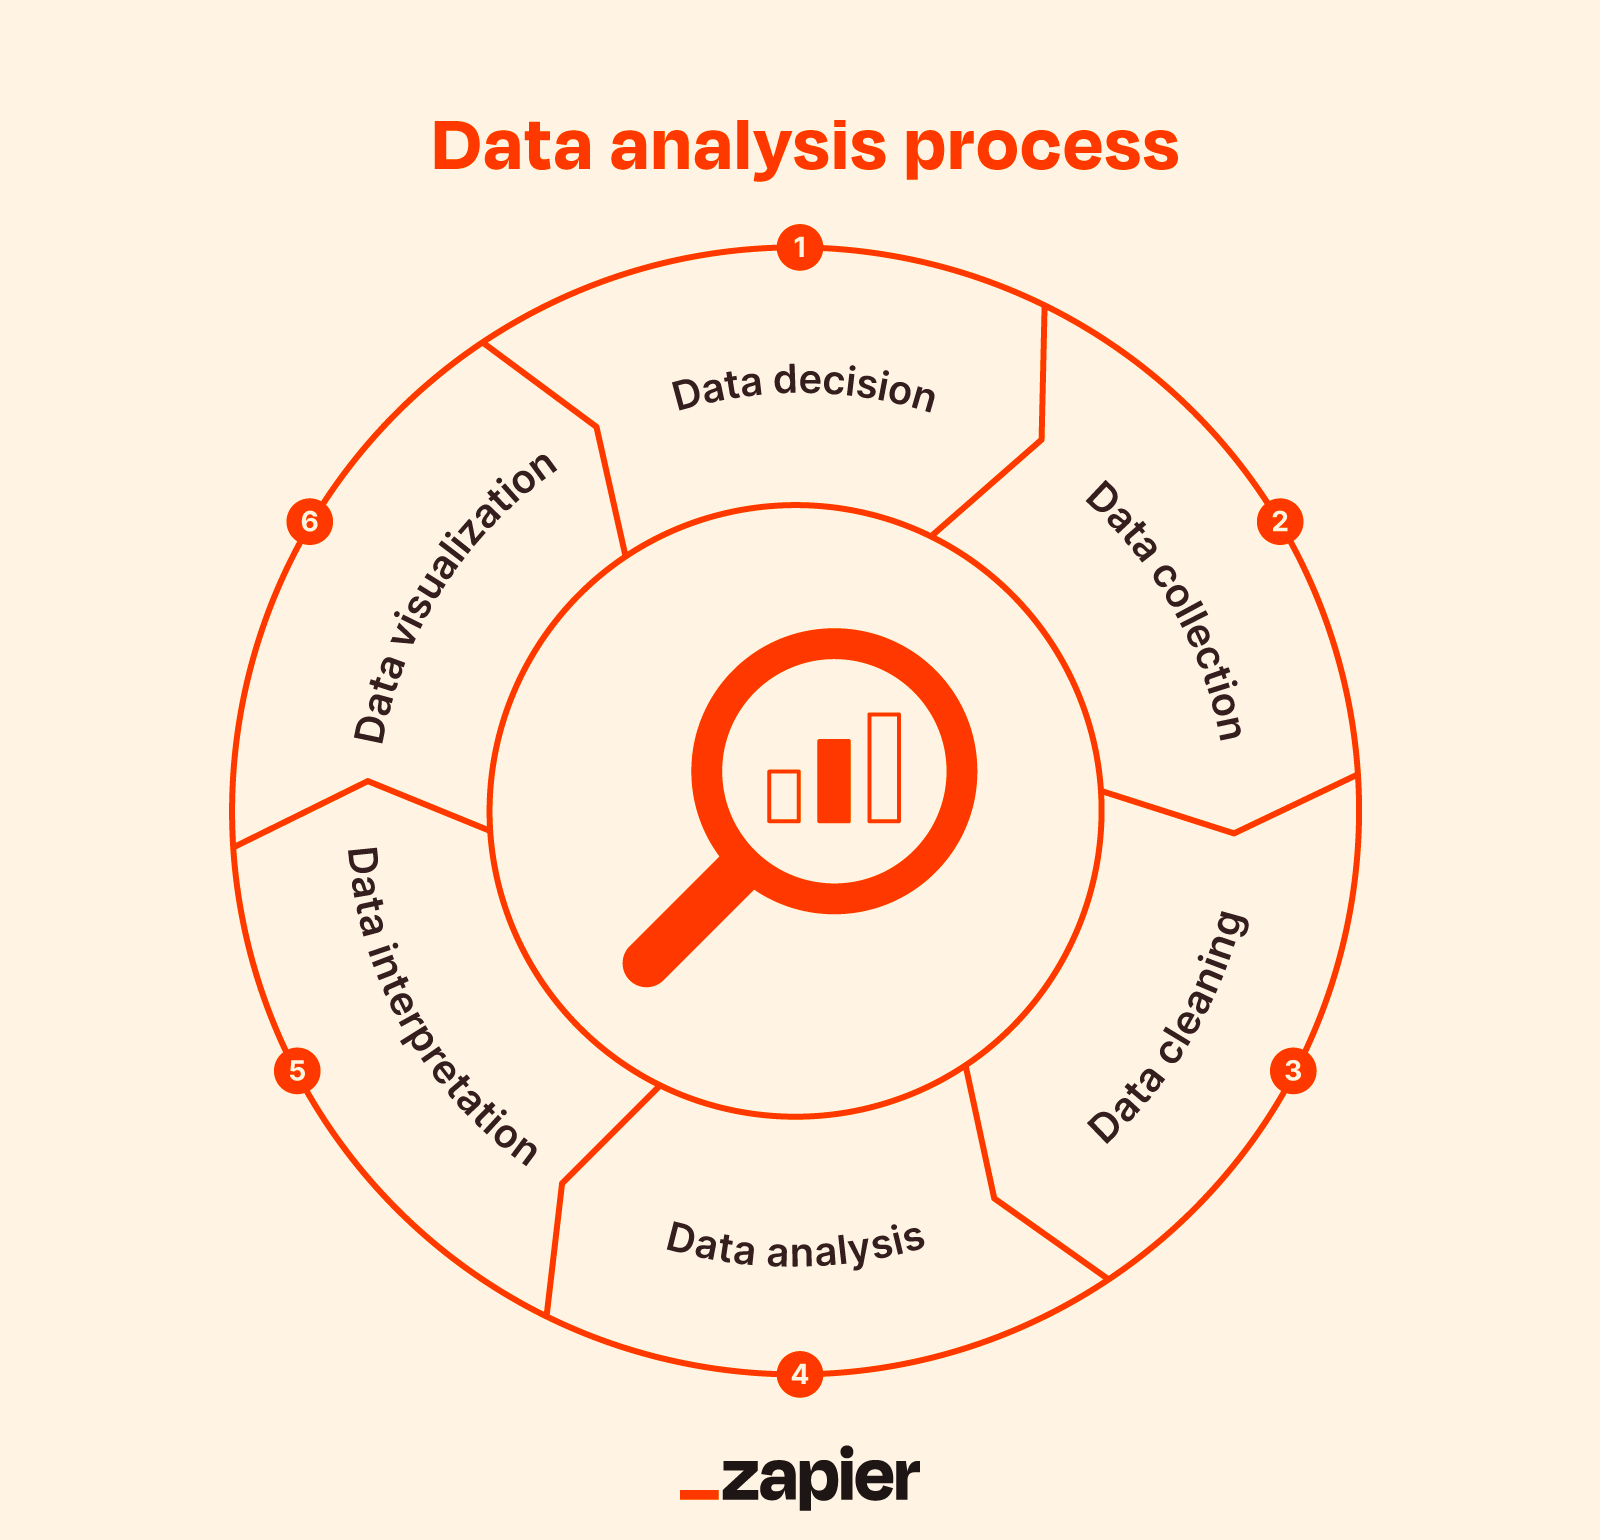 Data Analysis 101: A Simple Guide to Analysing Data and Driving Results